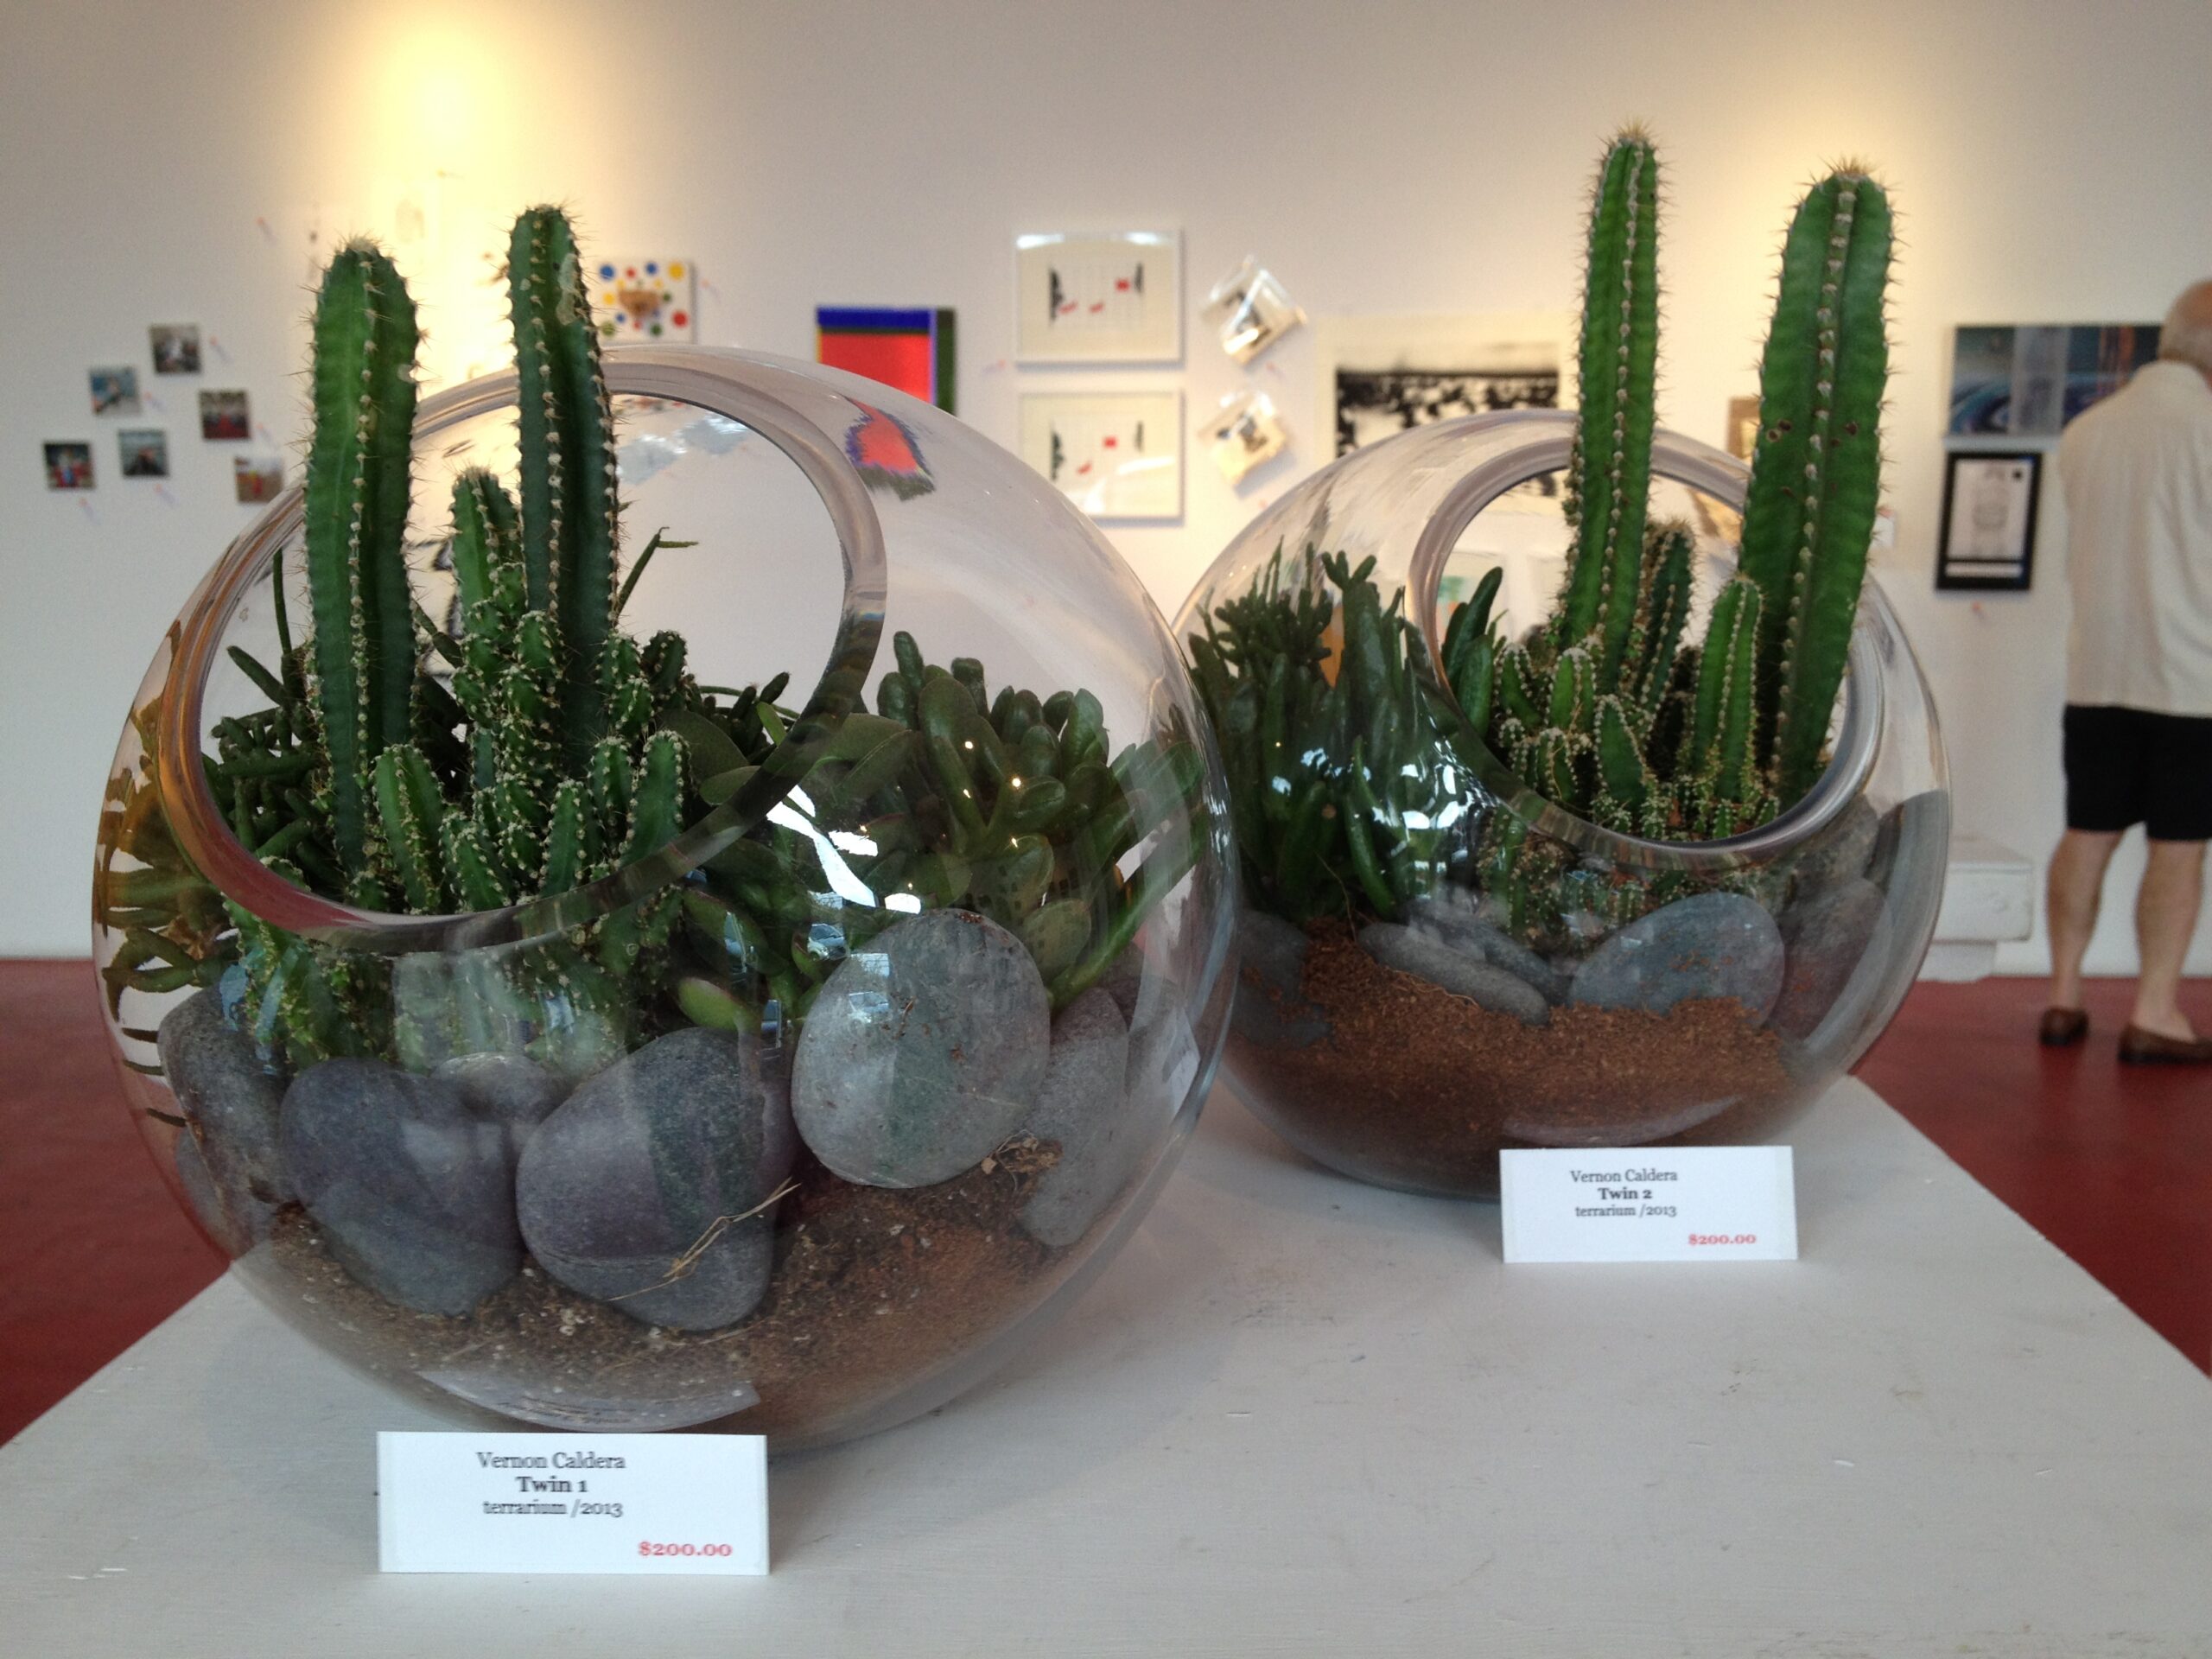 “Twin” terrariums featured at Apama Mackey Gallery